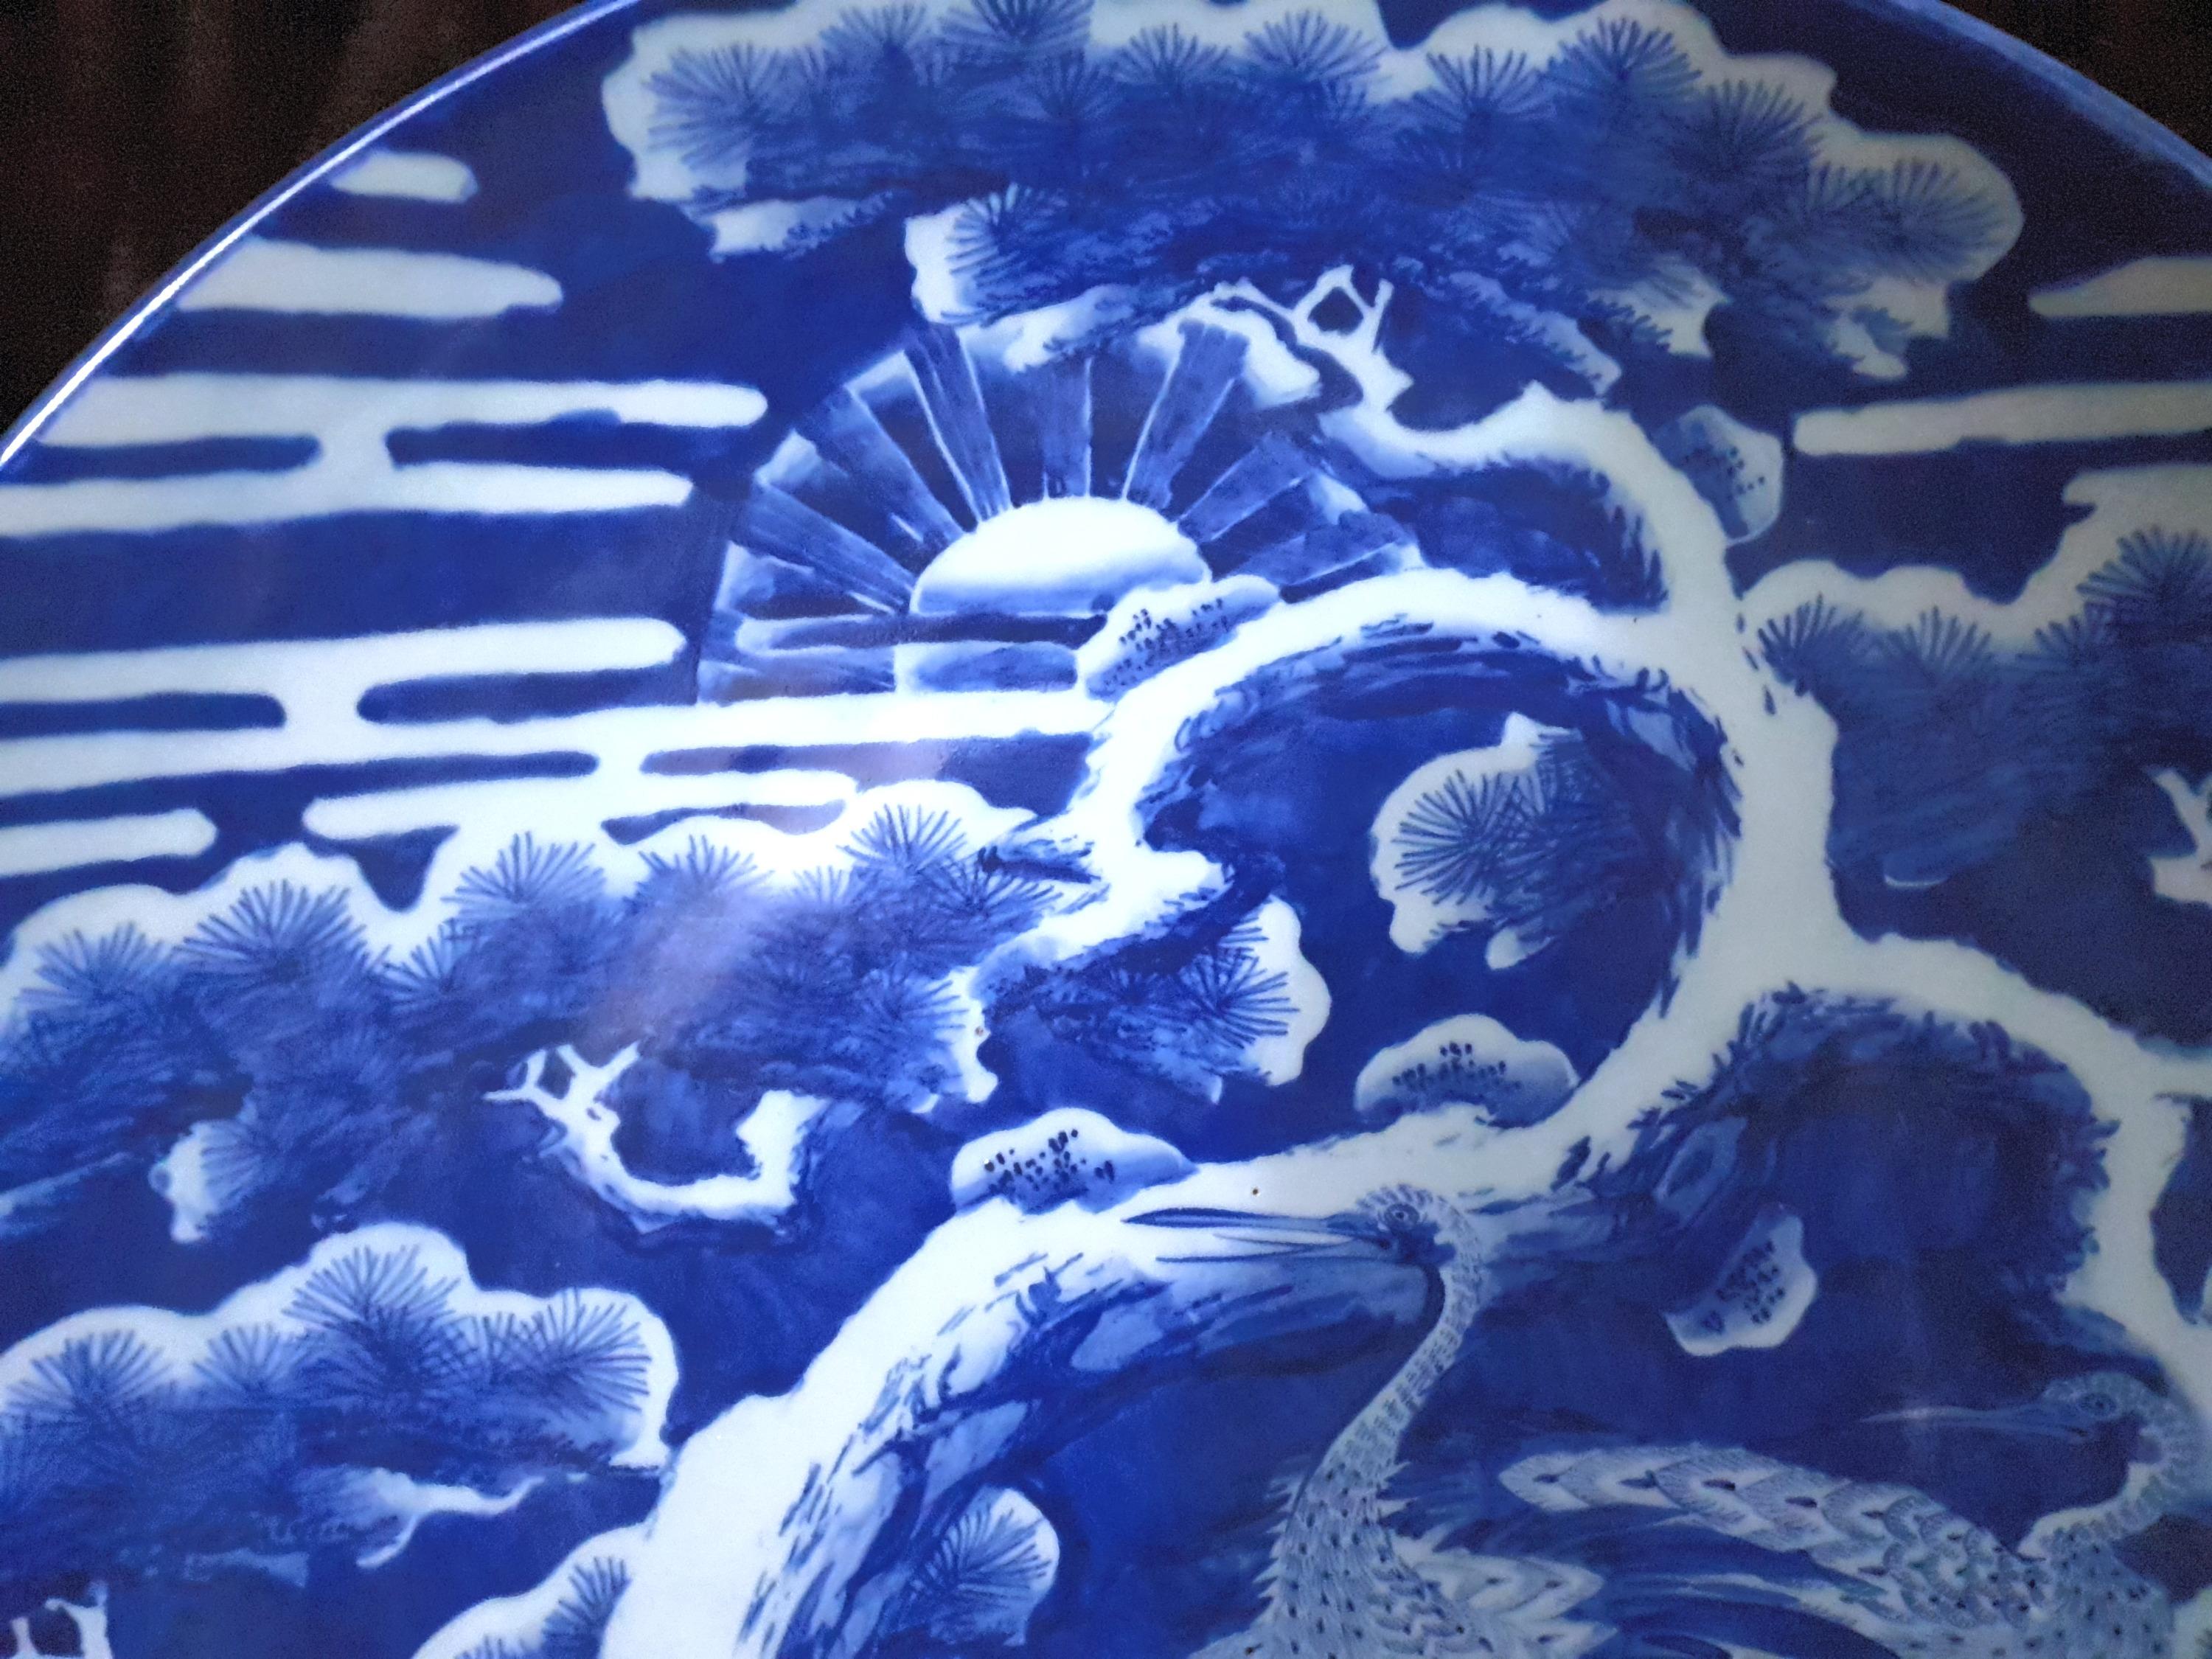 An rare and large Japanese Meiji period charger dates from 19th century. Stunning deep blue scenes with the main focus on three birds or mythical creatures. This piece is very significant due to the deep color and the Size. Marks are accompanied on